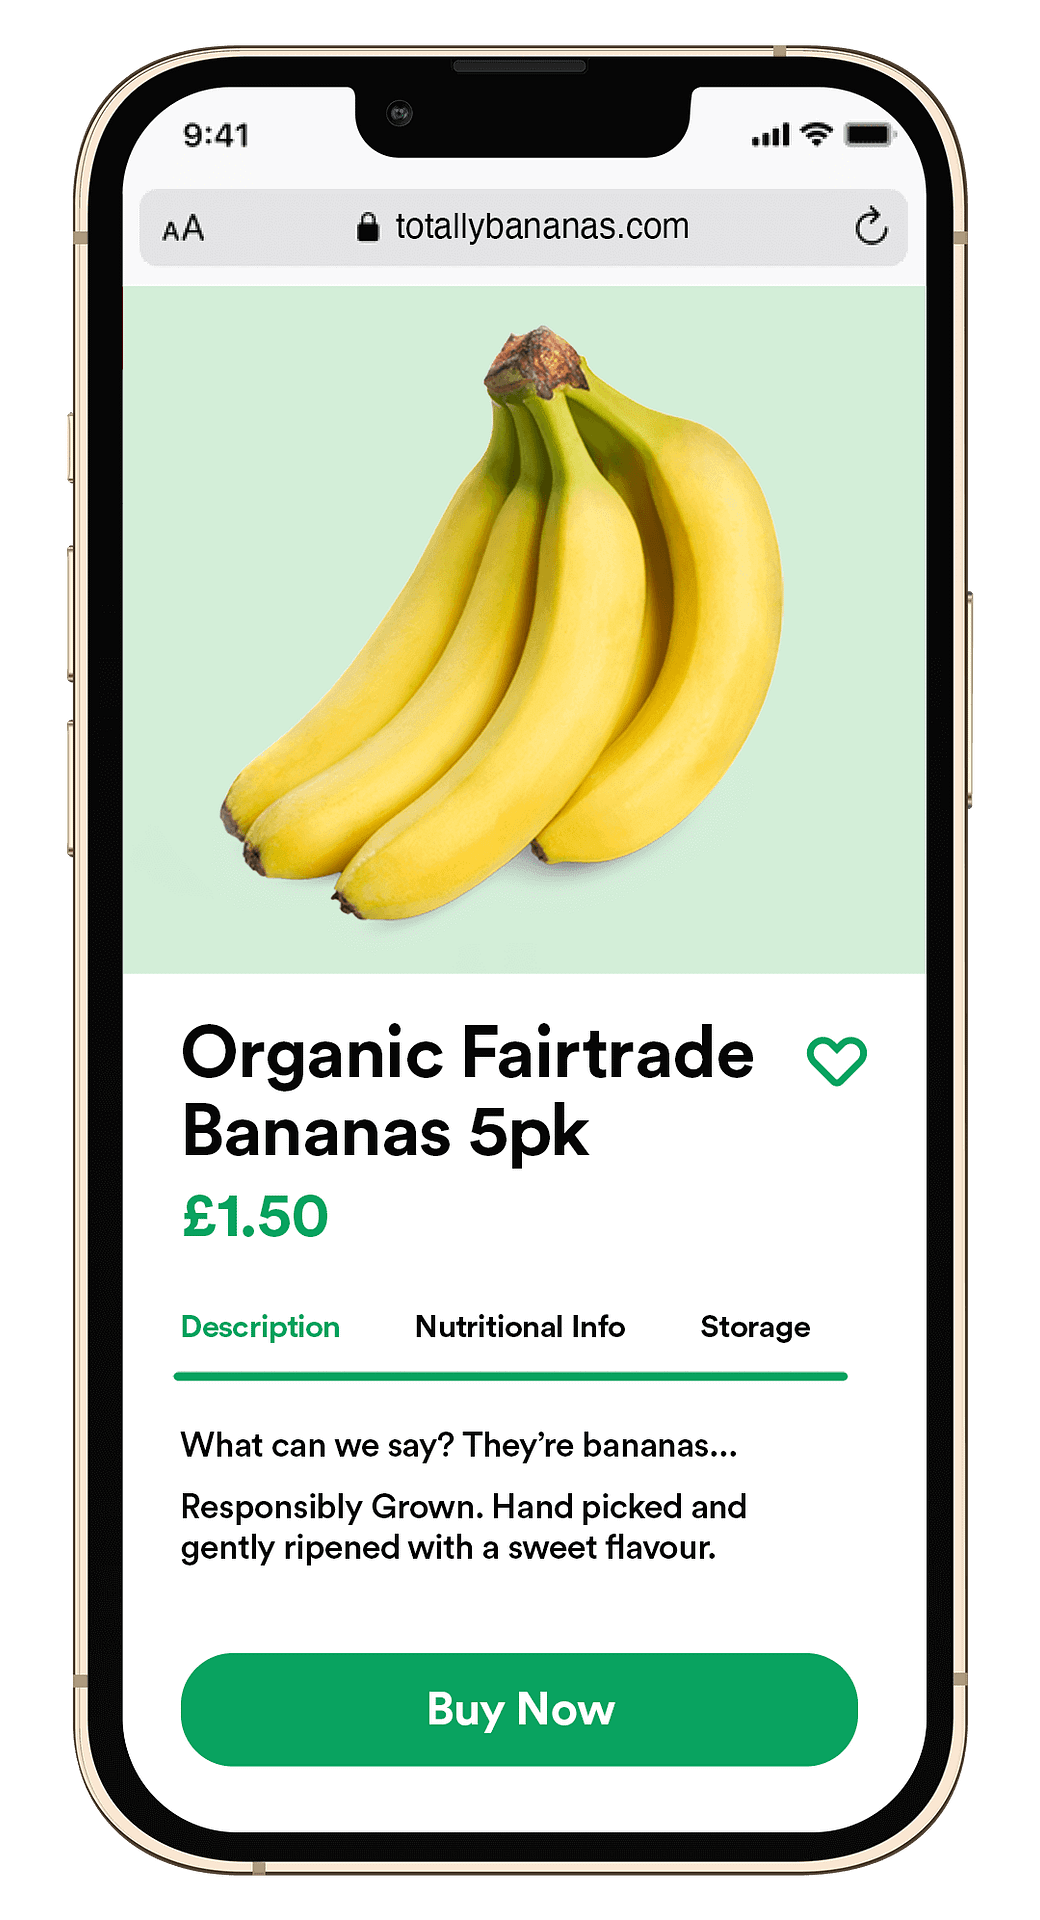 A product page selling bananas